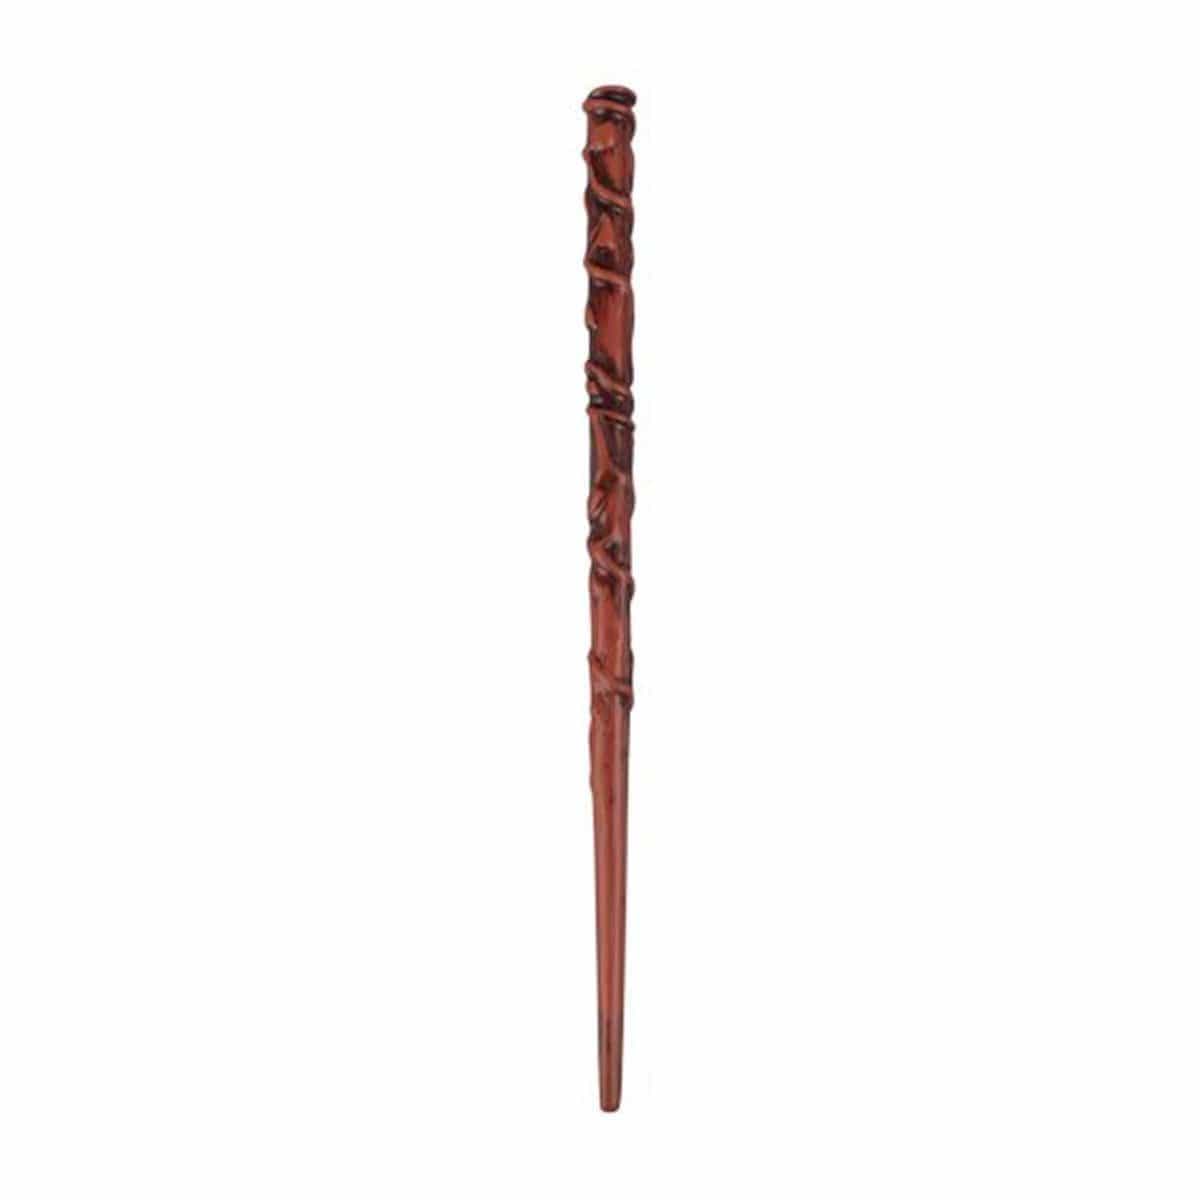 Buy Costume Accessories Harry Potter, Hermione Granger Wand sold at Party Expert